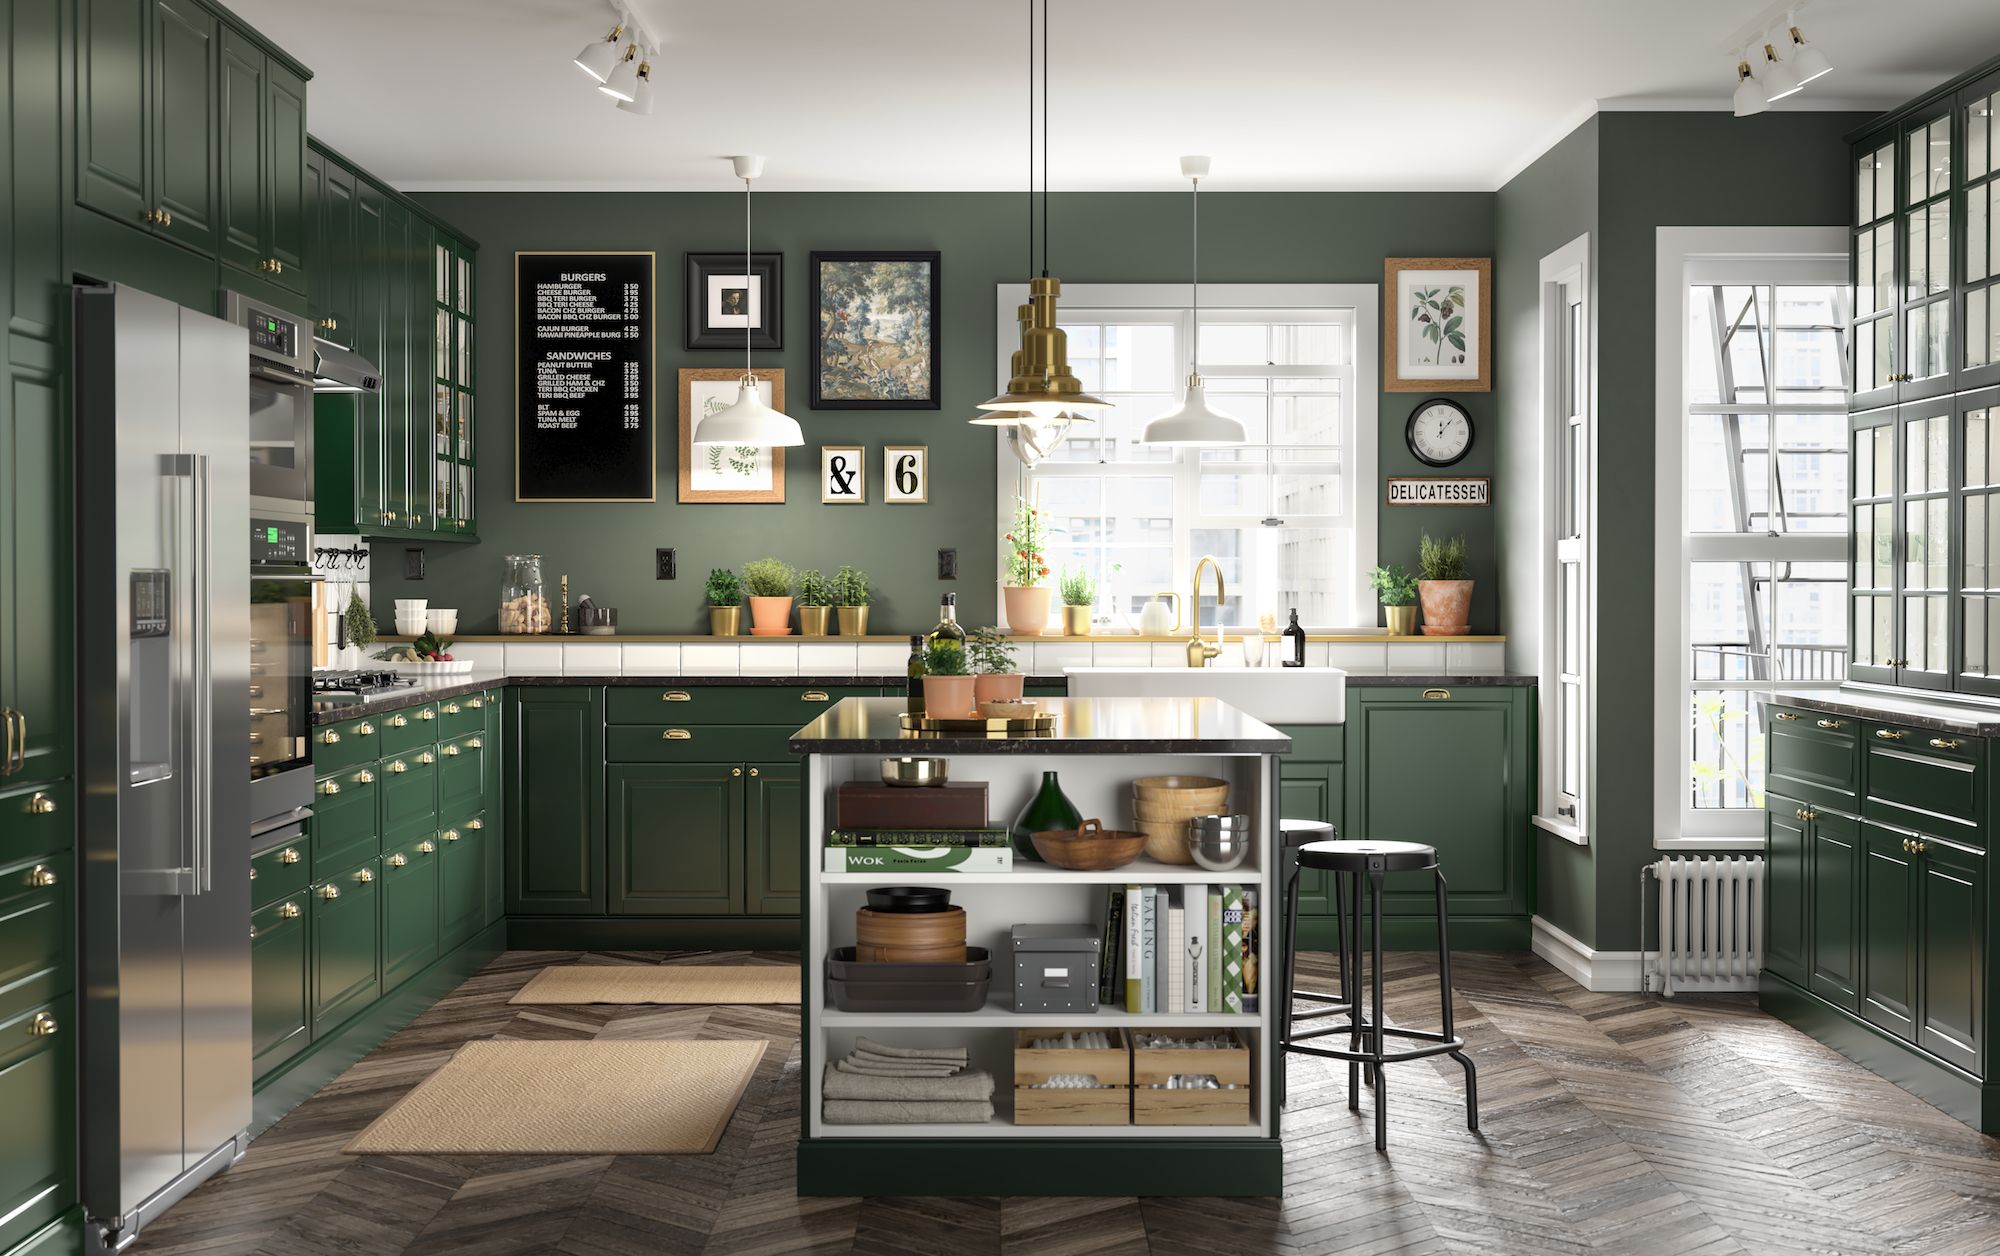 10 Kitchen Design Questions Answered By An Expert,Ikea Galant Wall Cabinet With Sliding Doors